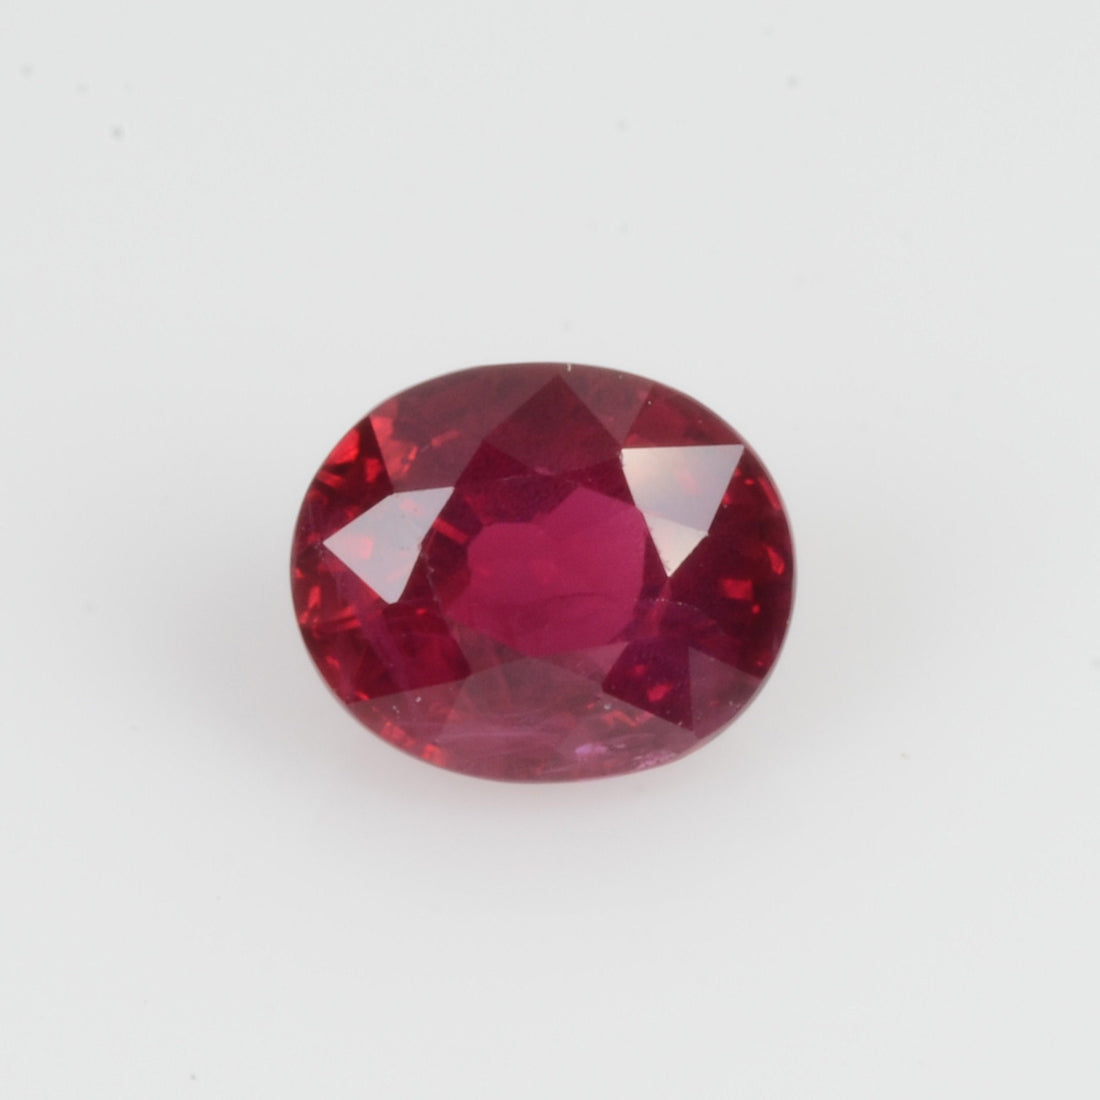 0.77 Cts Natural Ruby Loose Gemstone Oval Cut